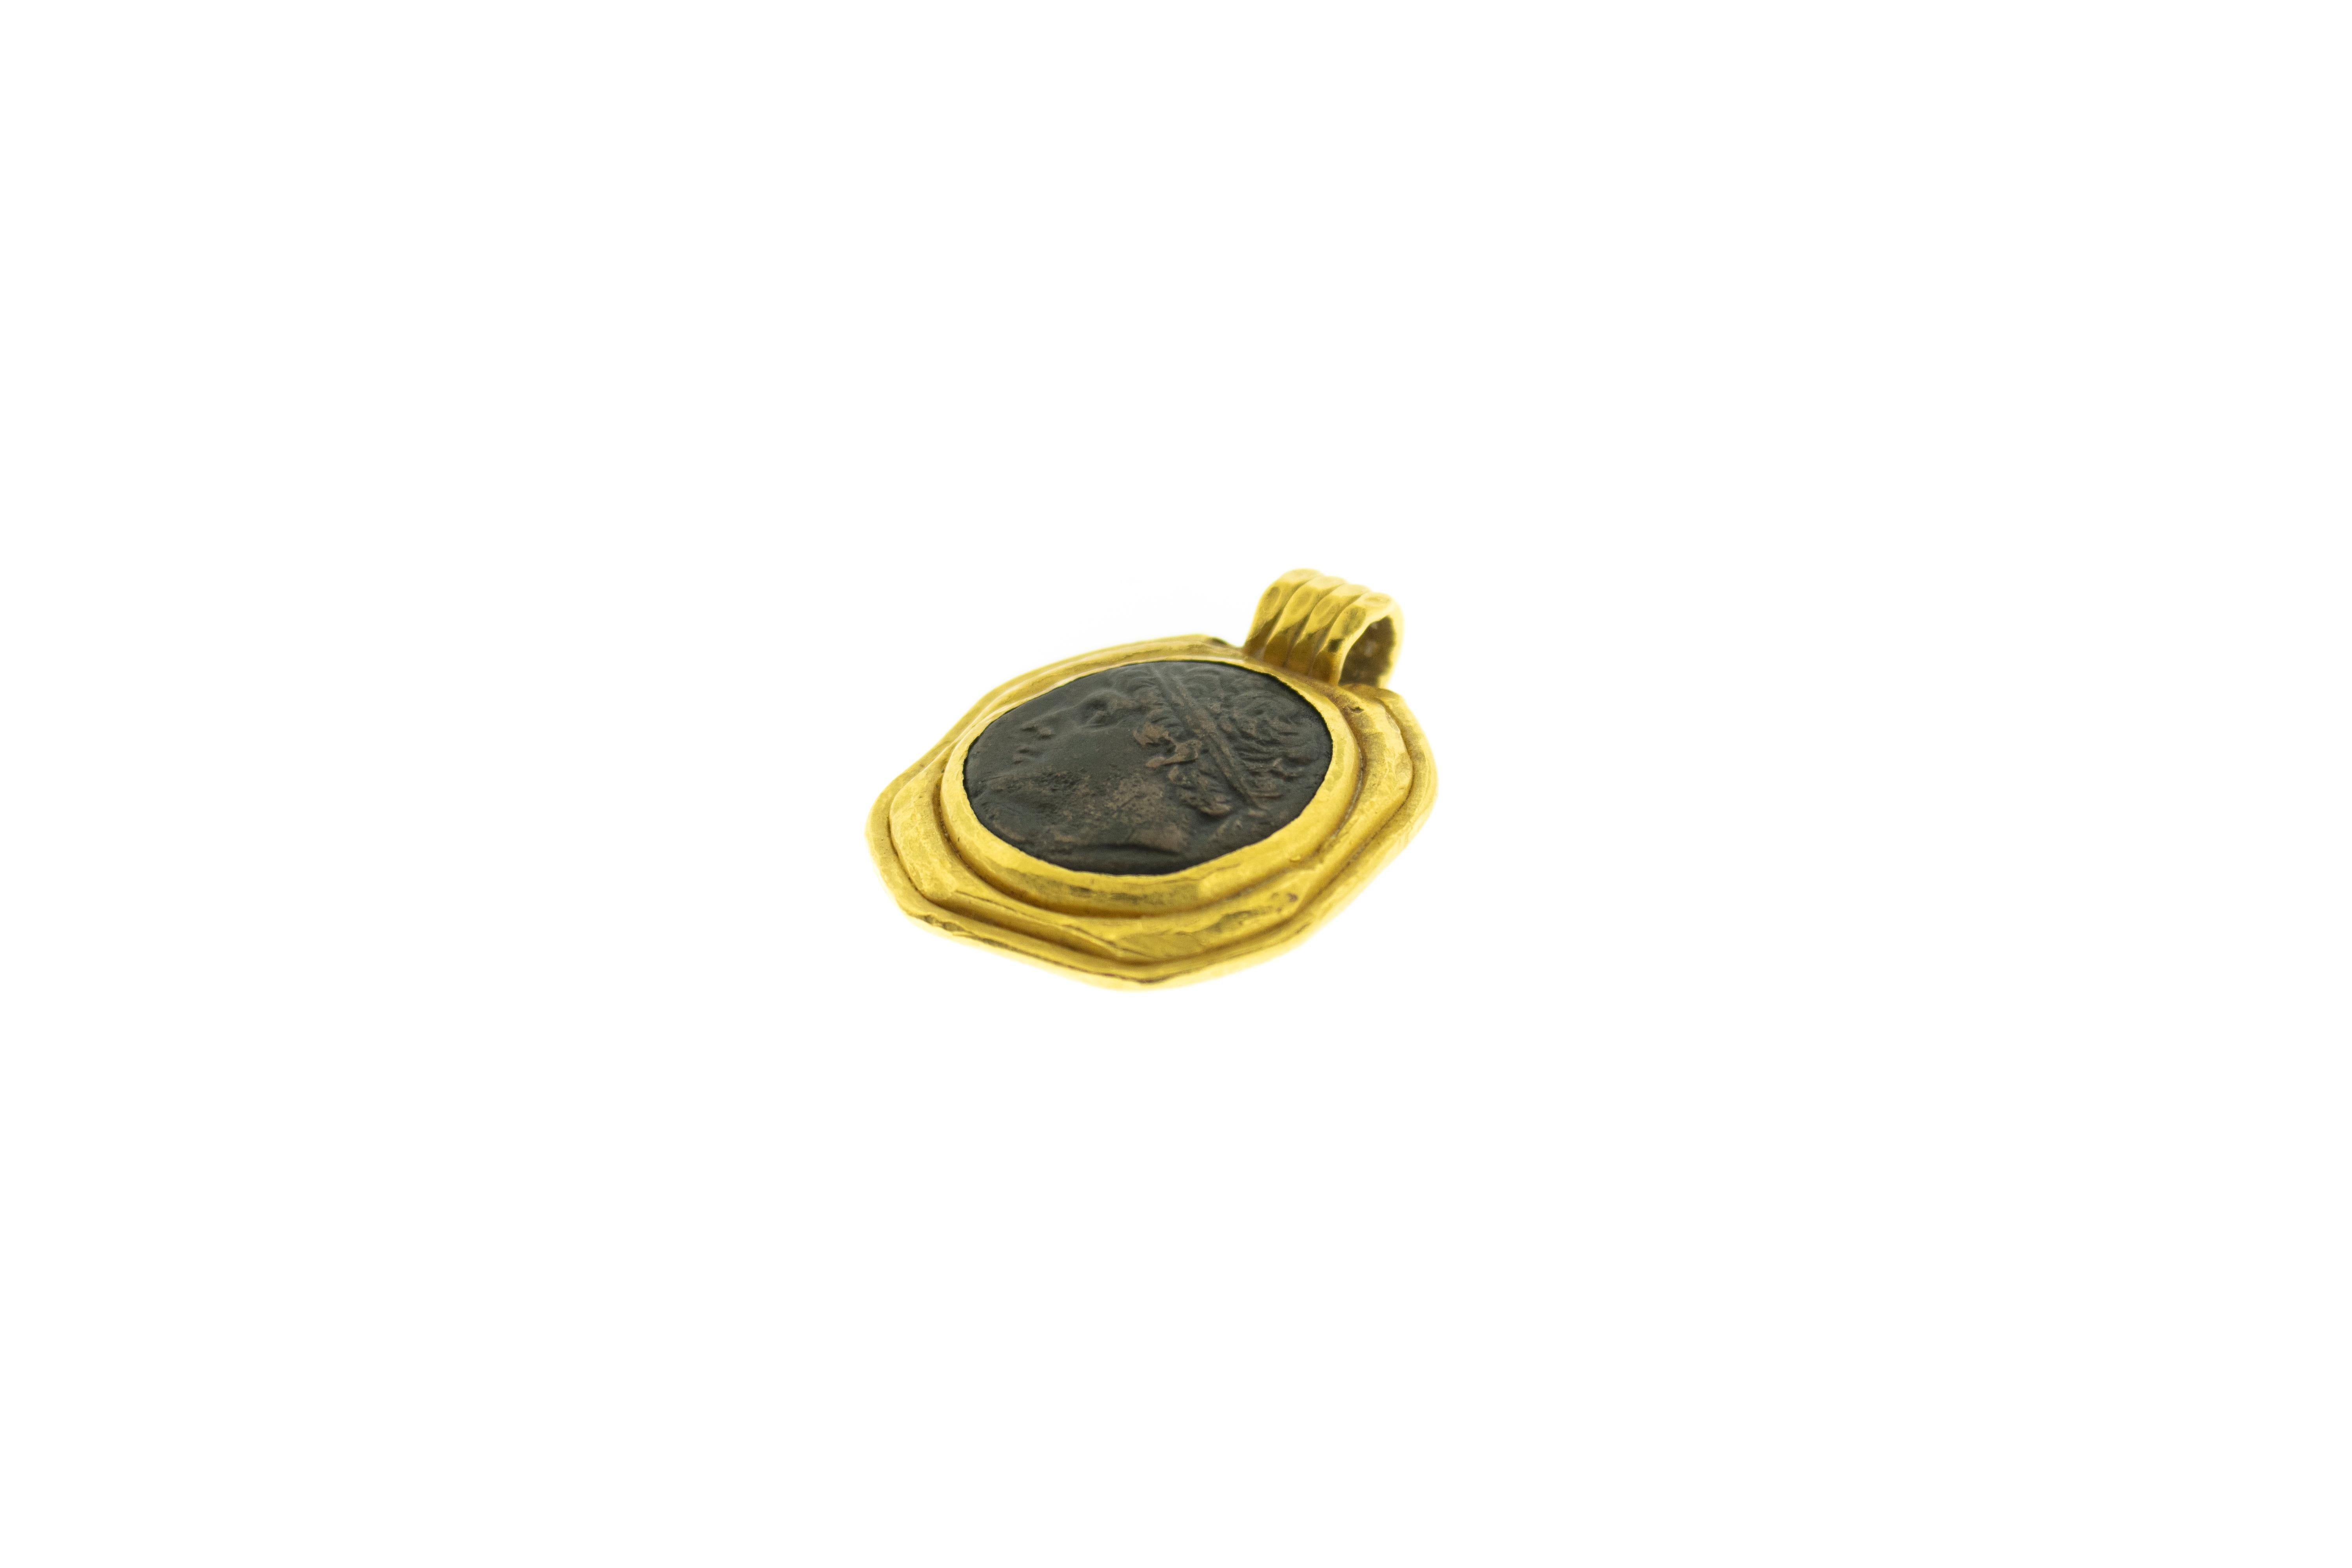 Ancient Artifact Mounted in 22k Gold Pendant. Ancient Grecian or Roman coin mounted in 22k Gold. Total weight 47.45 grams. 22k Gold casing was not made in ancient time. Height 1.75 inches Width 1.5